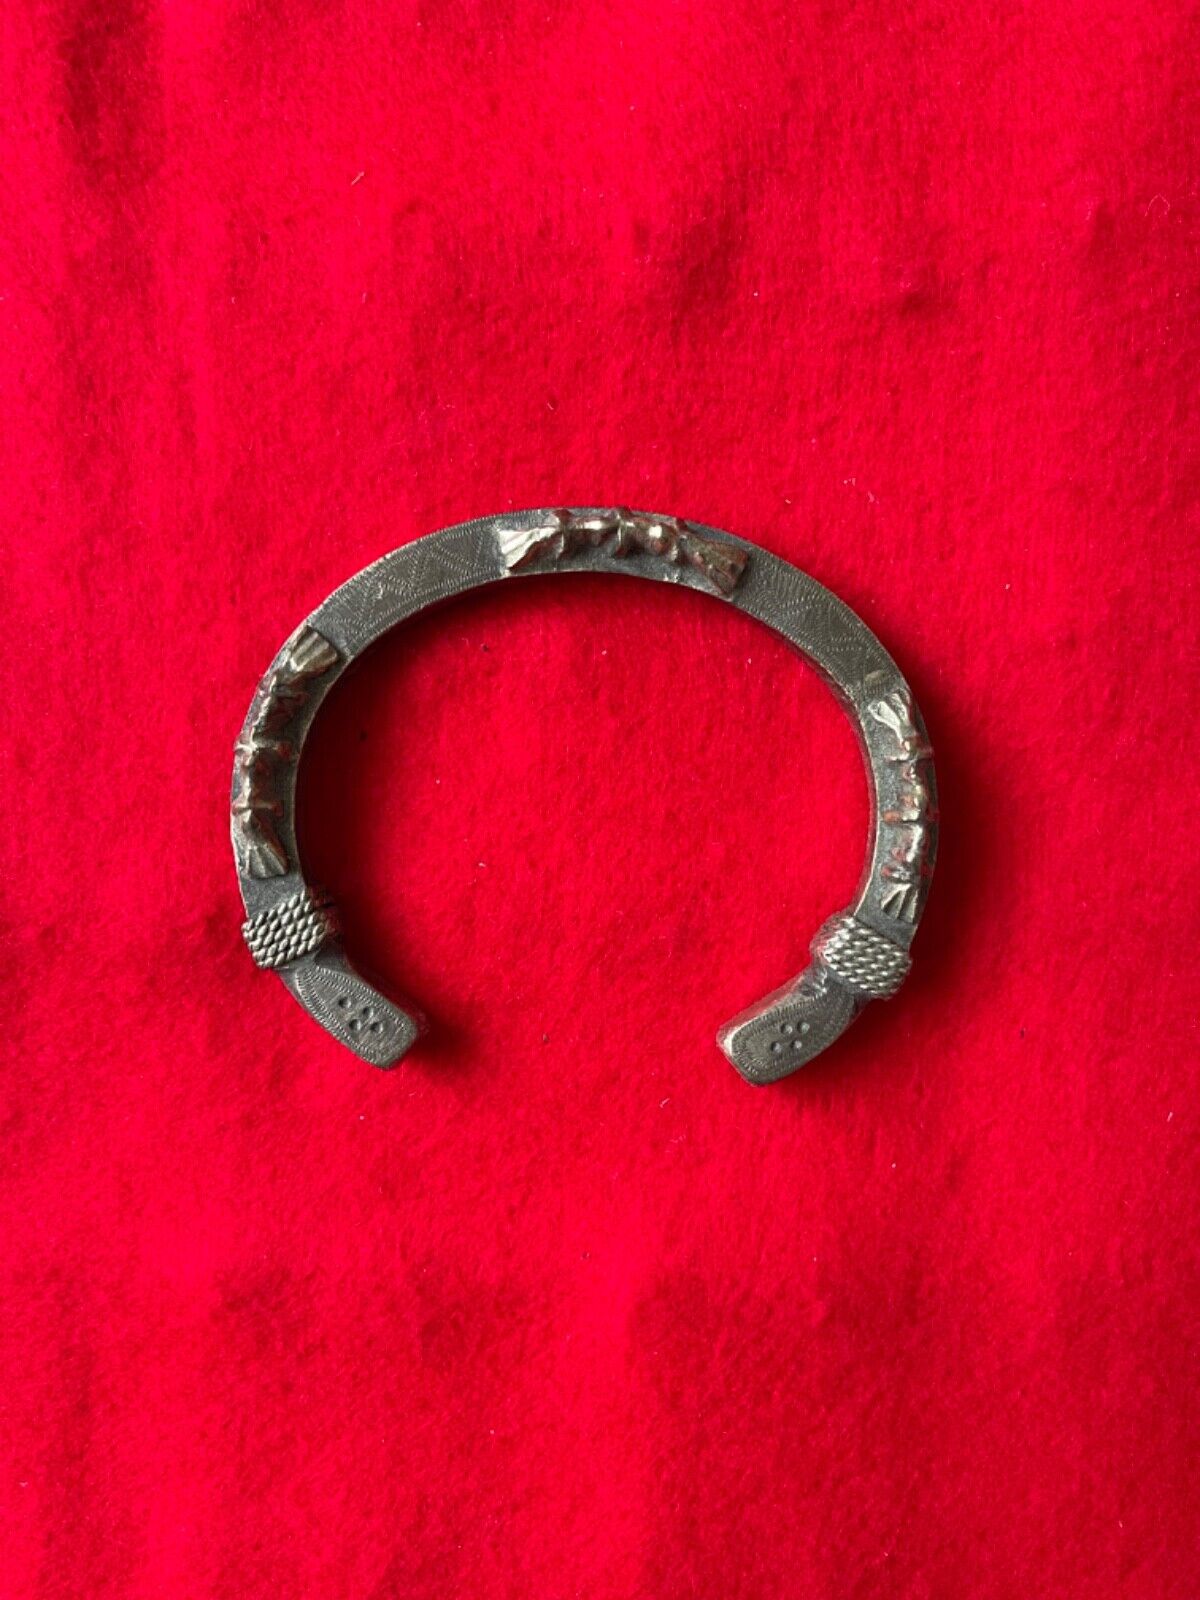 19C Antique Ethnic Islamic Solid Silver Bracelet North Africa/Middle East/Asia